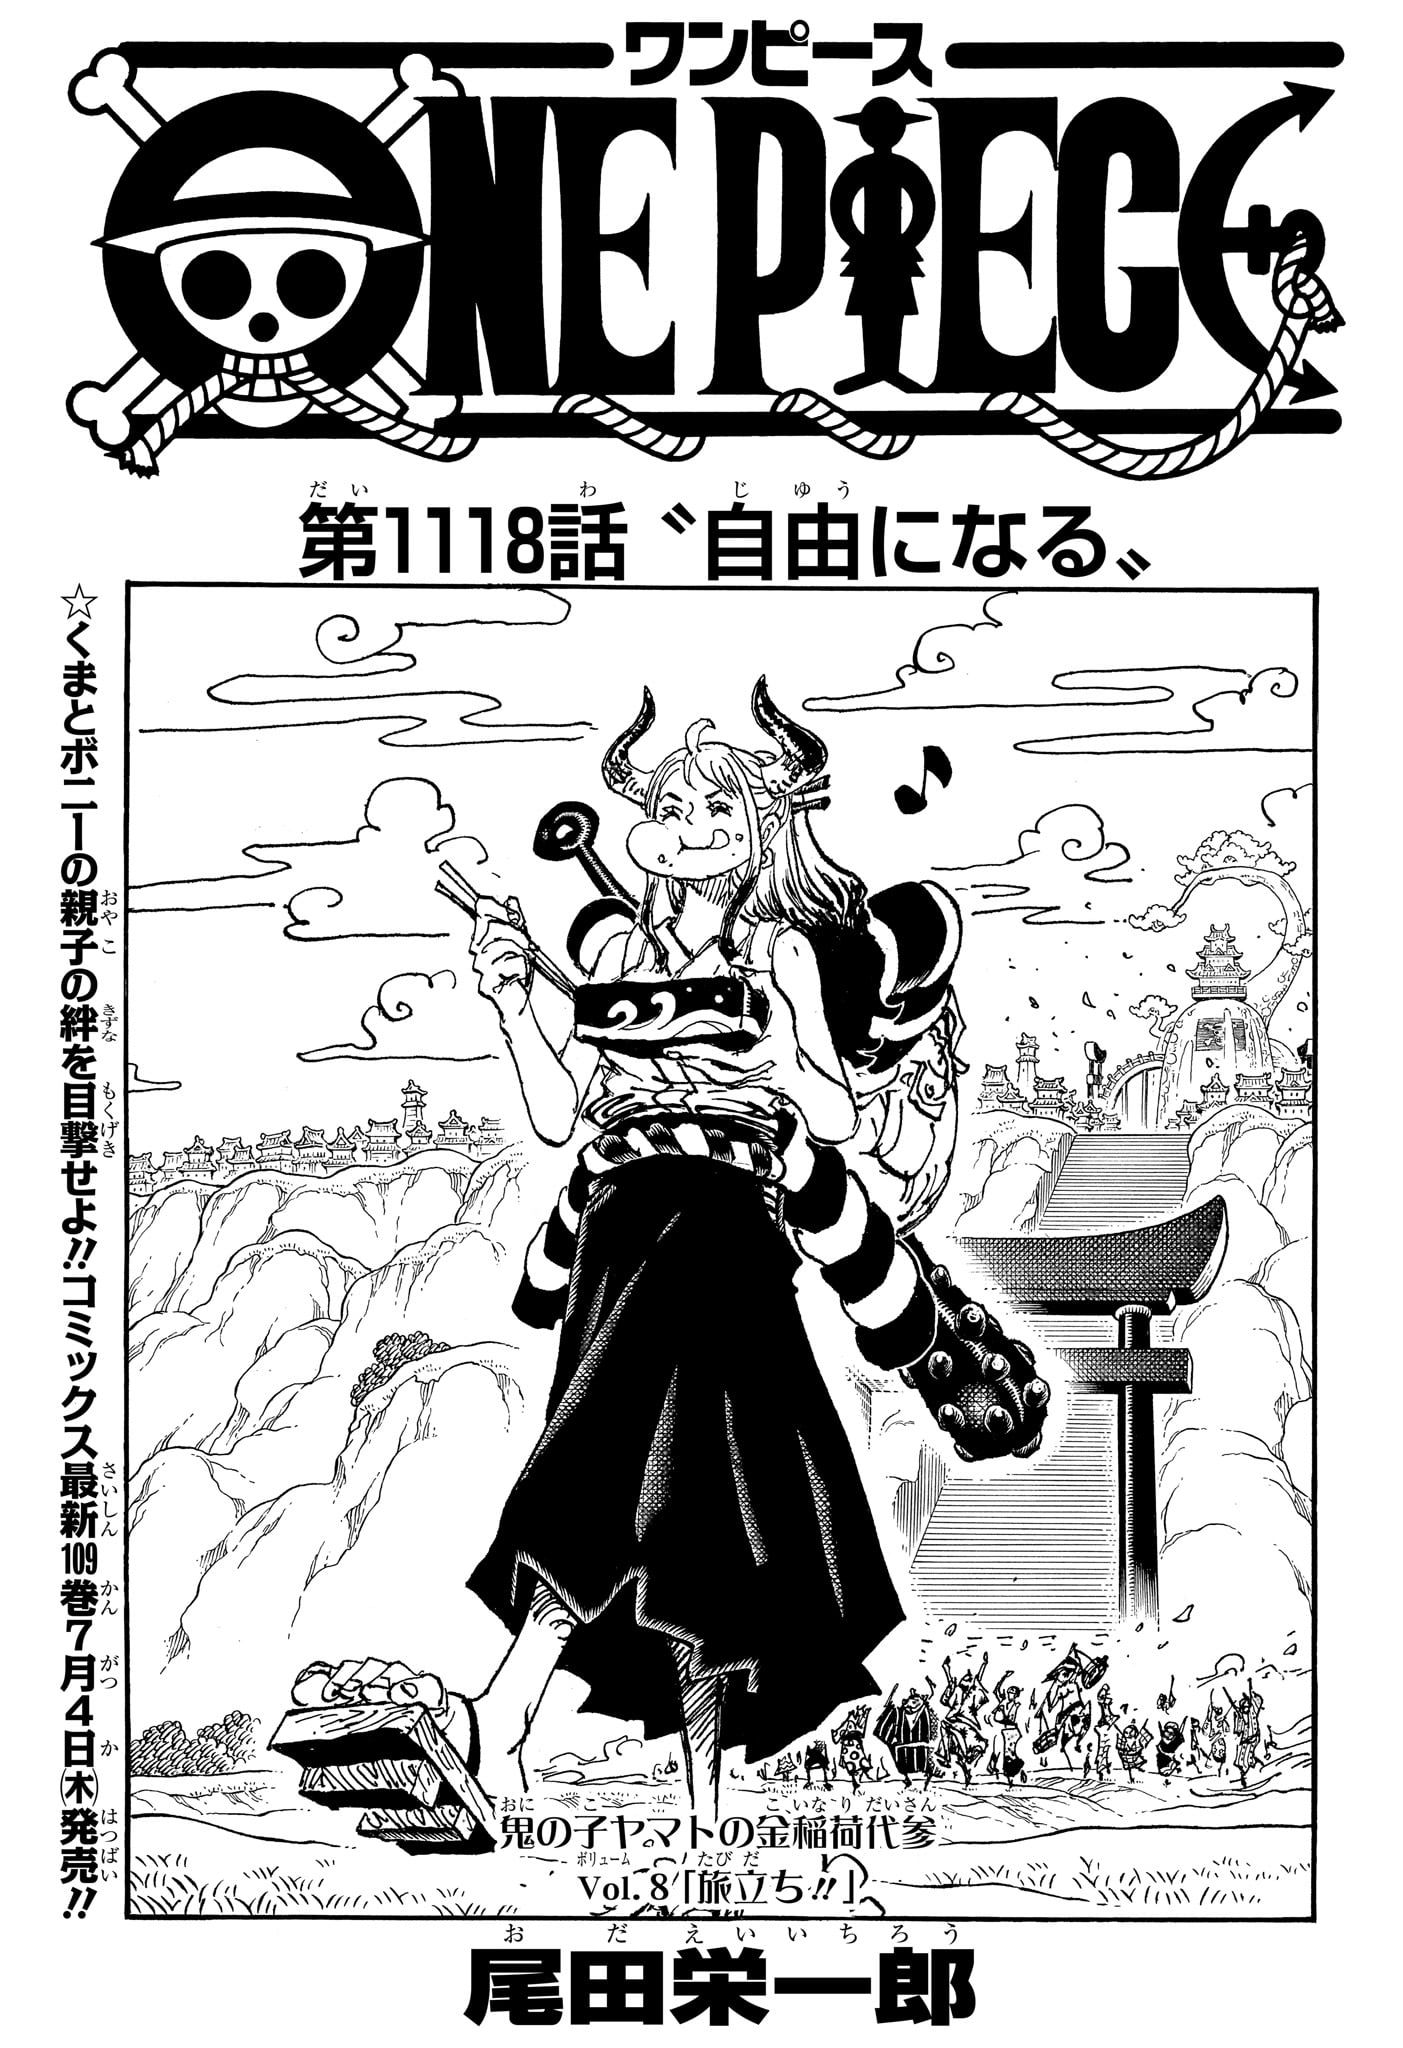 One Piece - Chapter 1118 - Page 1